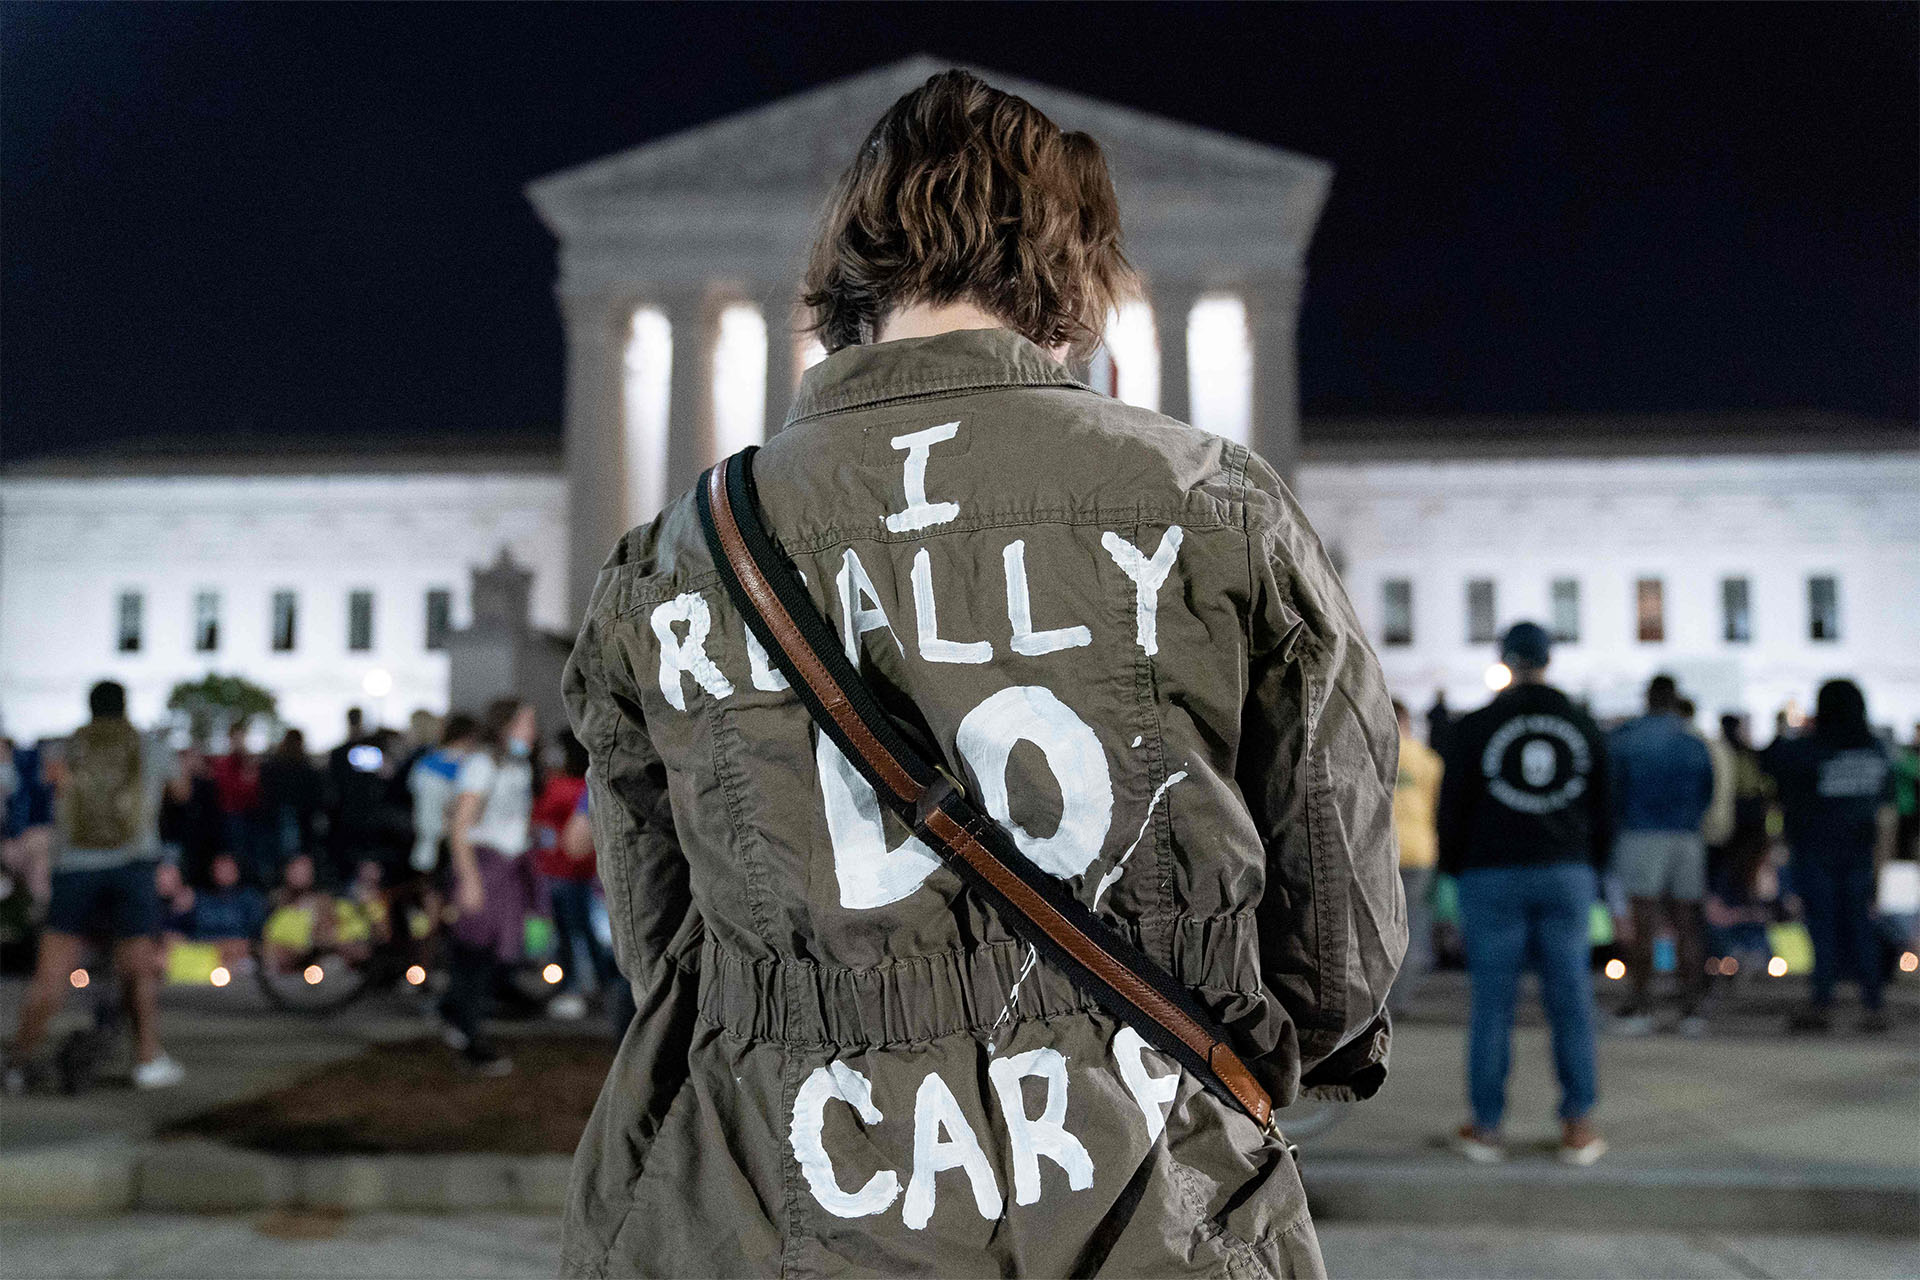 A photo of a woman wearing a jacket that says "I do really care"